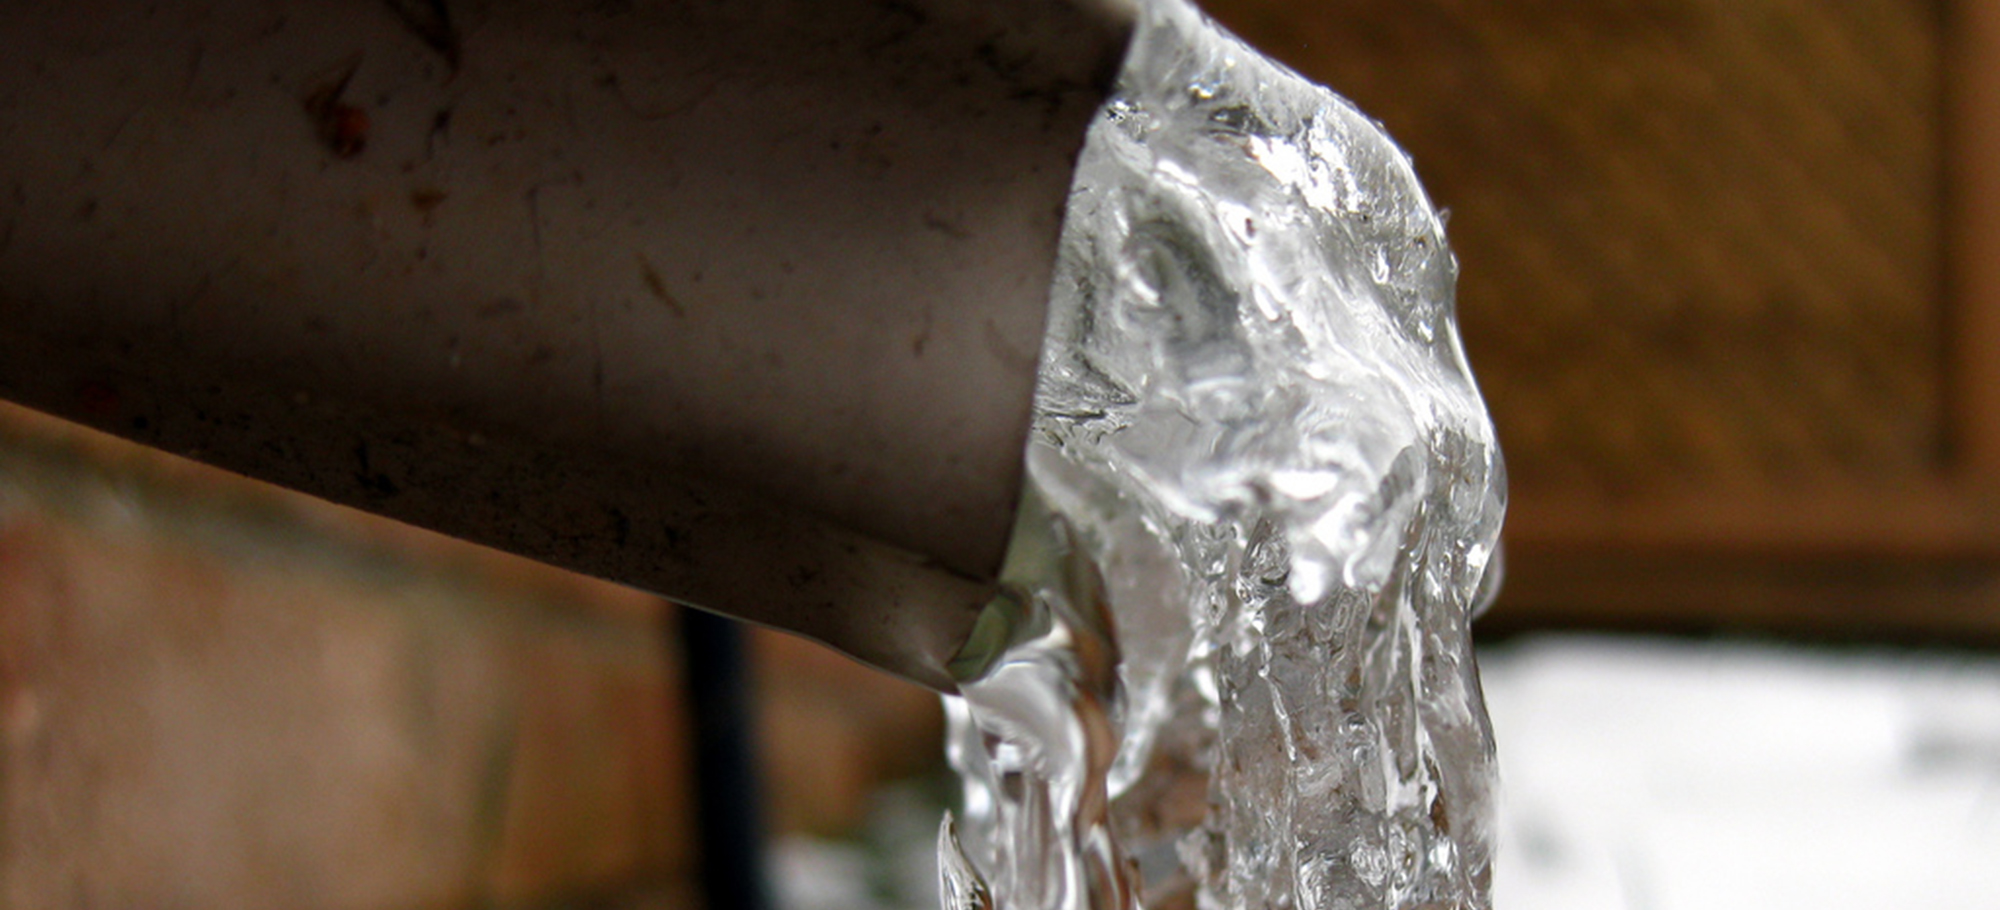 avoiding frozen pipes this winter